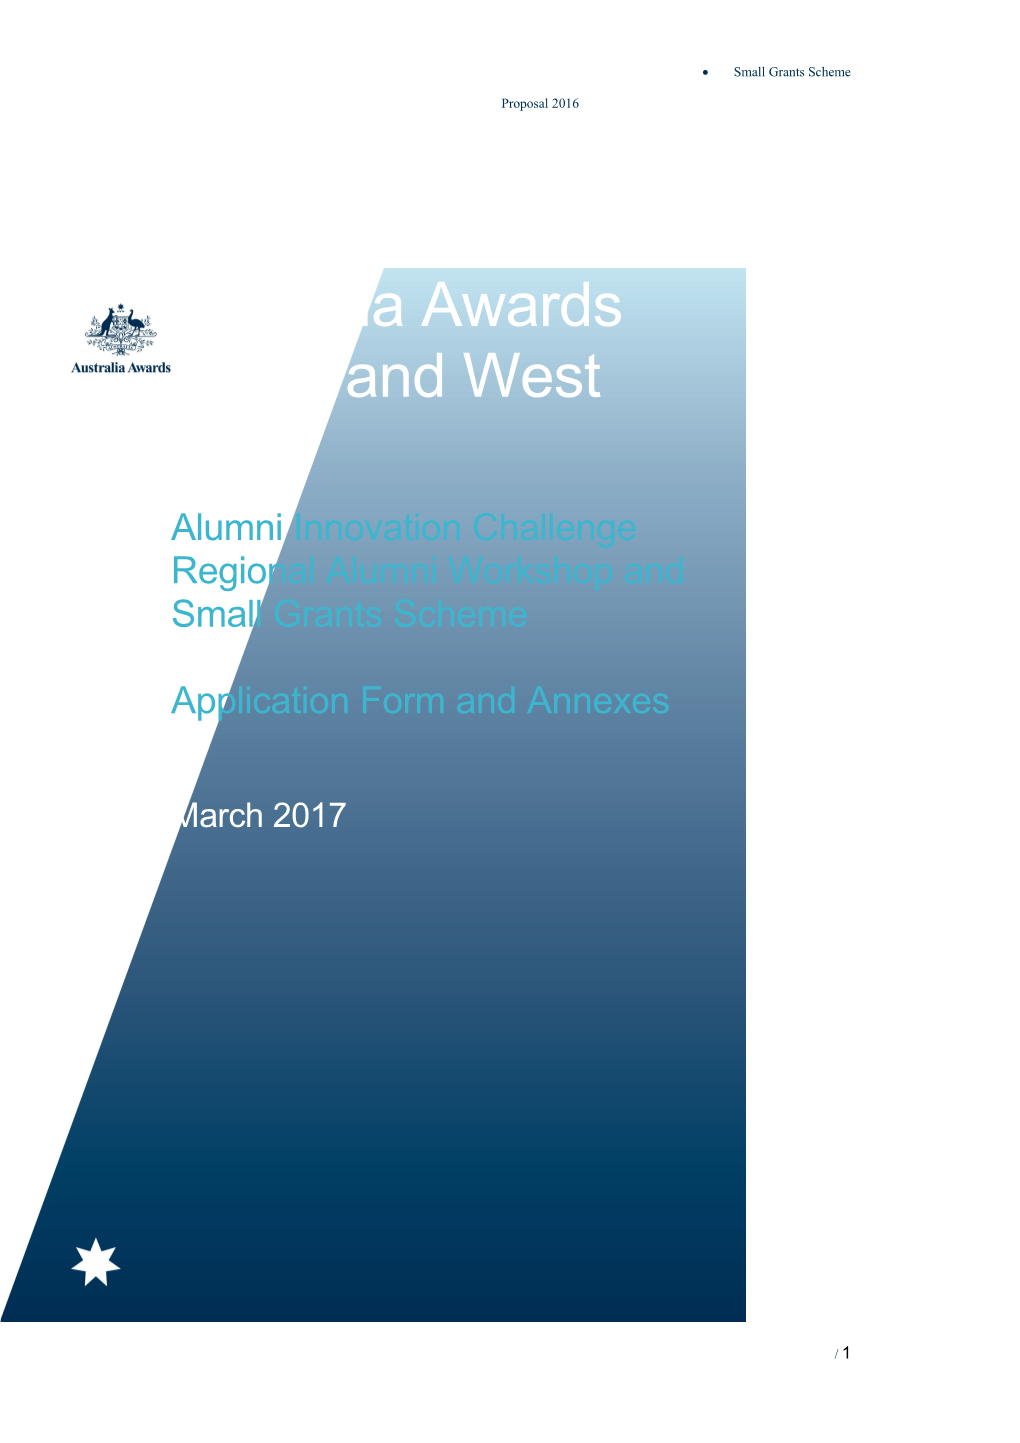 Australia Awards South and West Asia